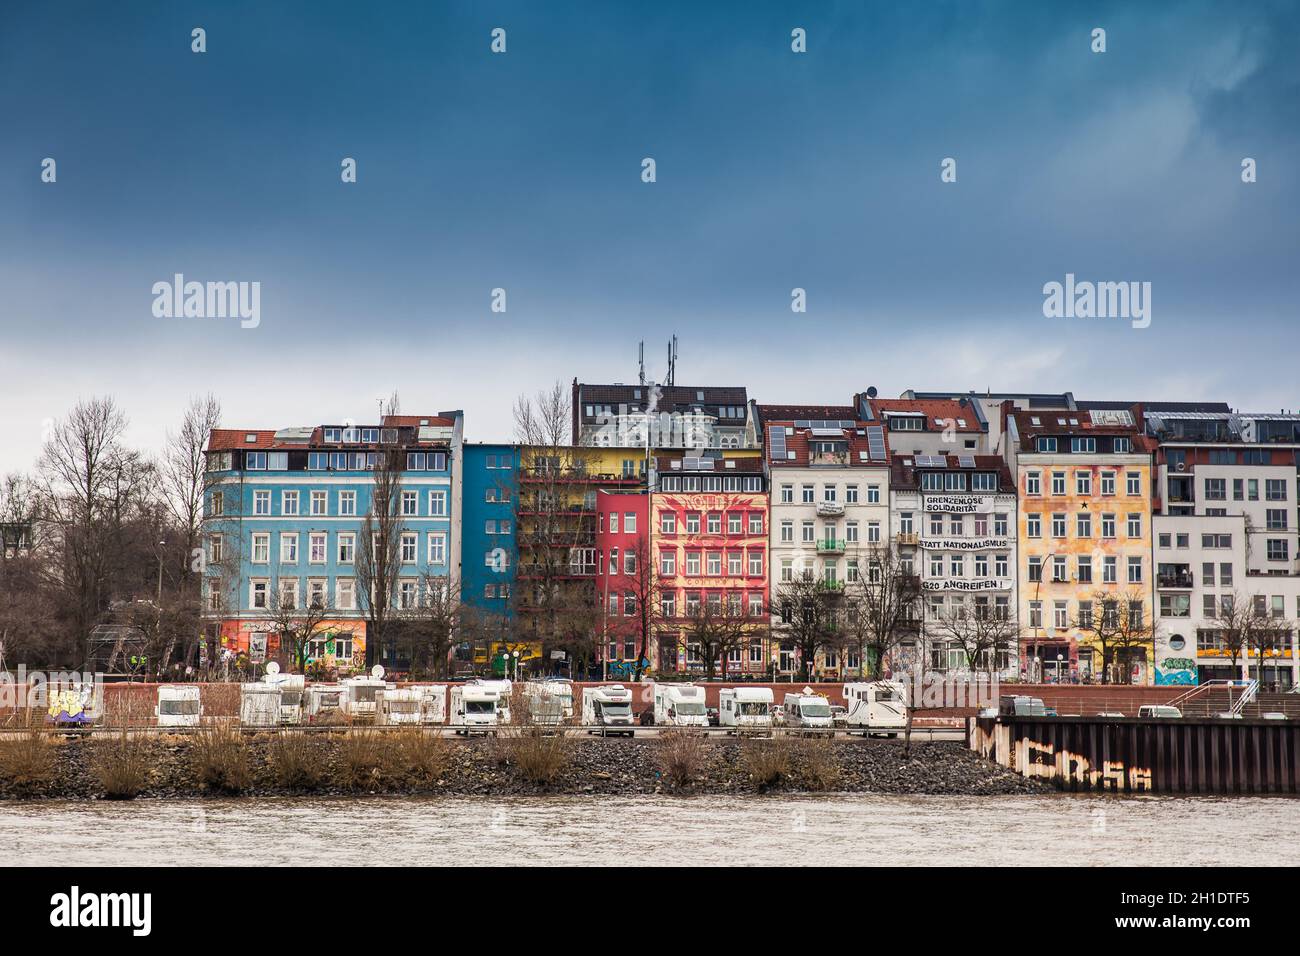 HAMBURG, GERMANY - MARCH, 2018: Caravans and buildings on the banks of the Elbe river in Hamburg Stock Photo